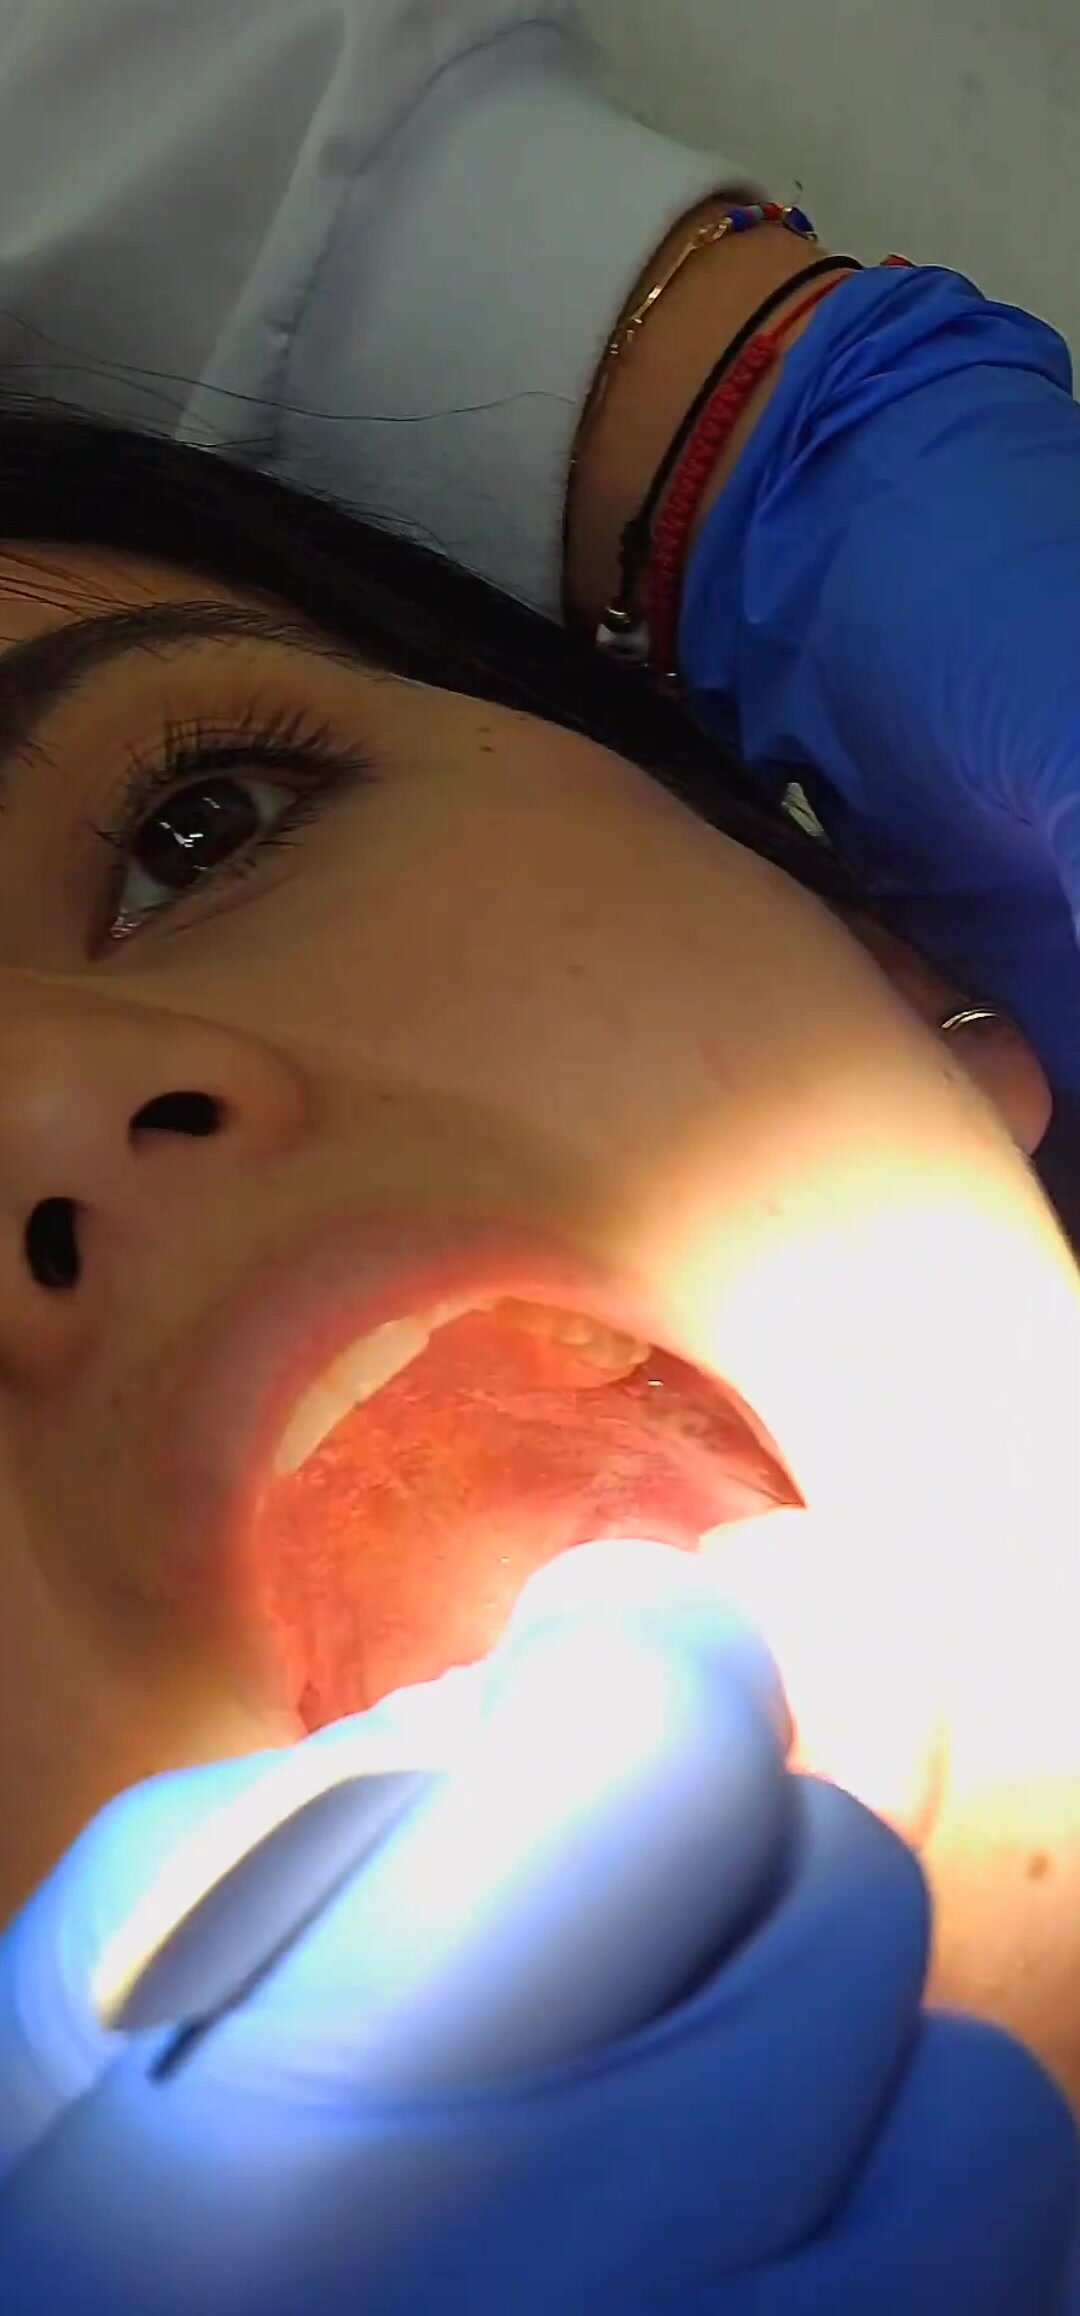 Woman's uvula in mouth inspection